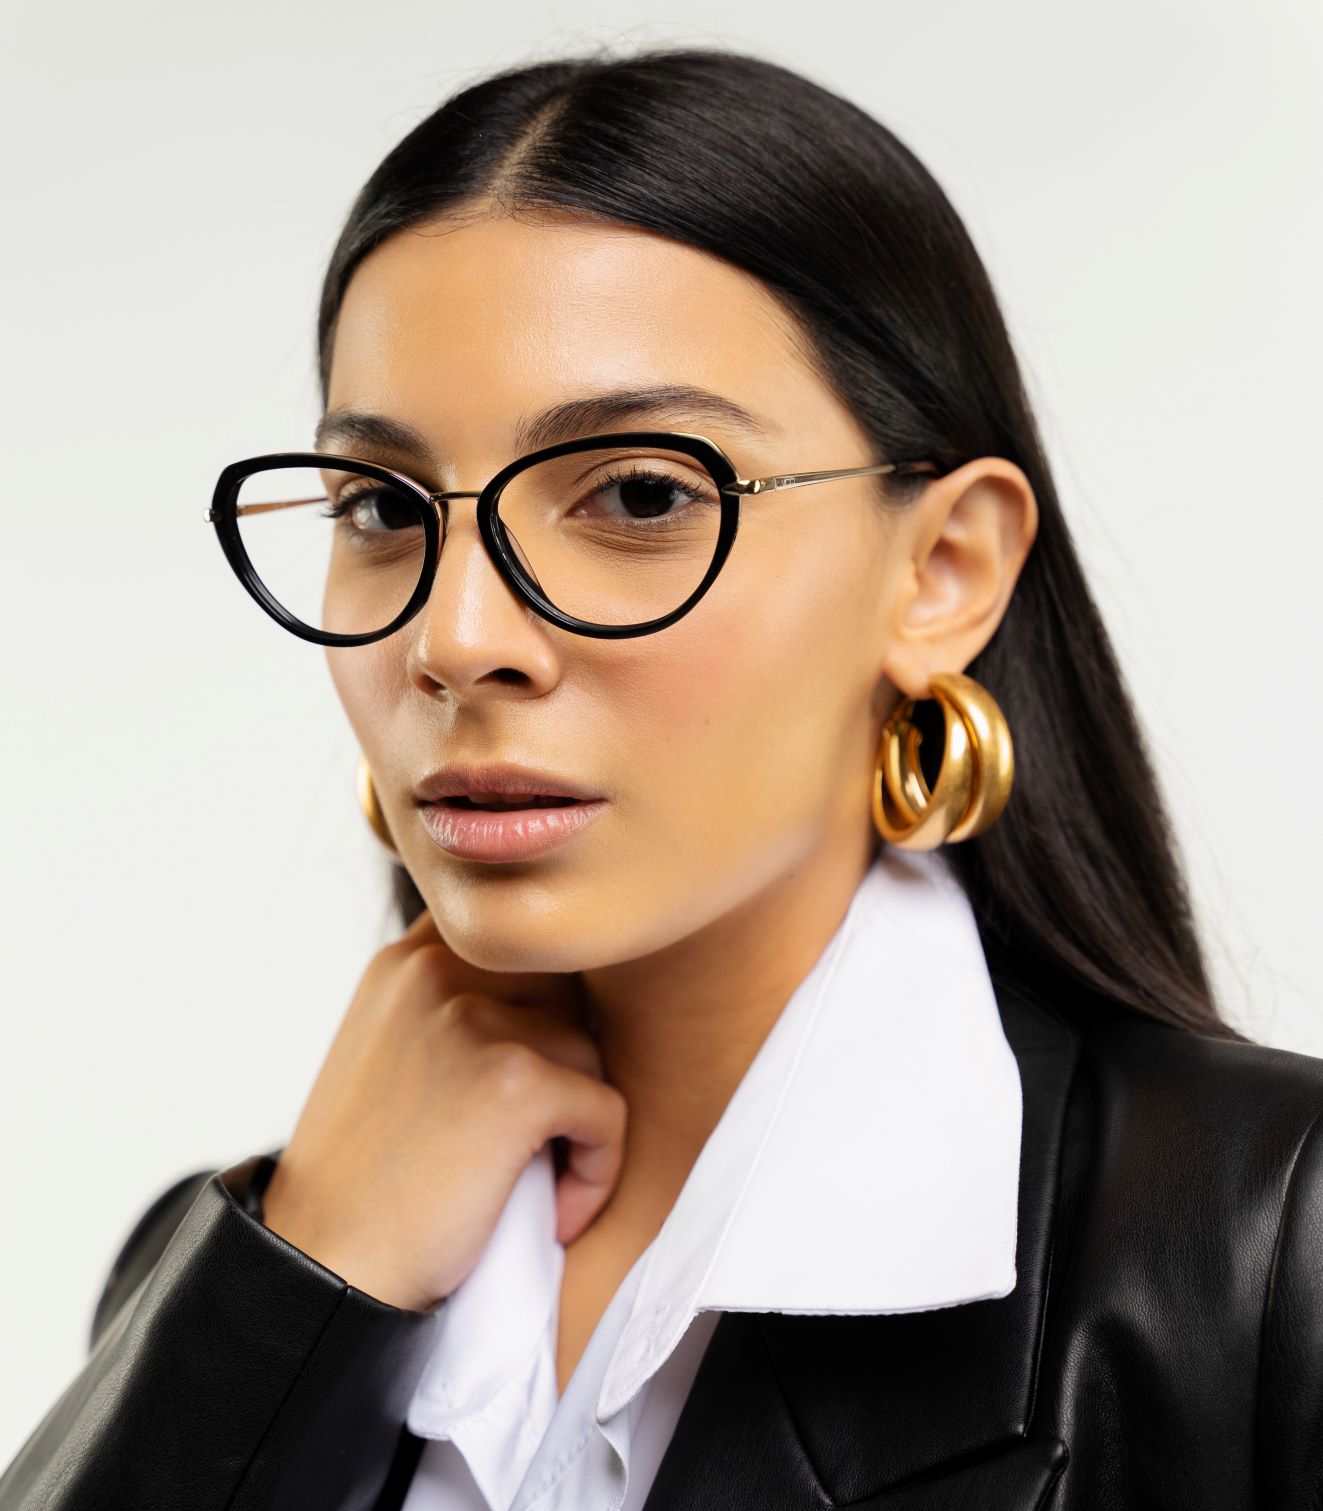 How to Pick the Right Glasses for Your Face Shape